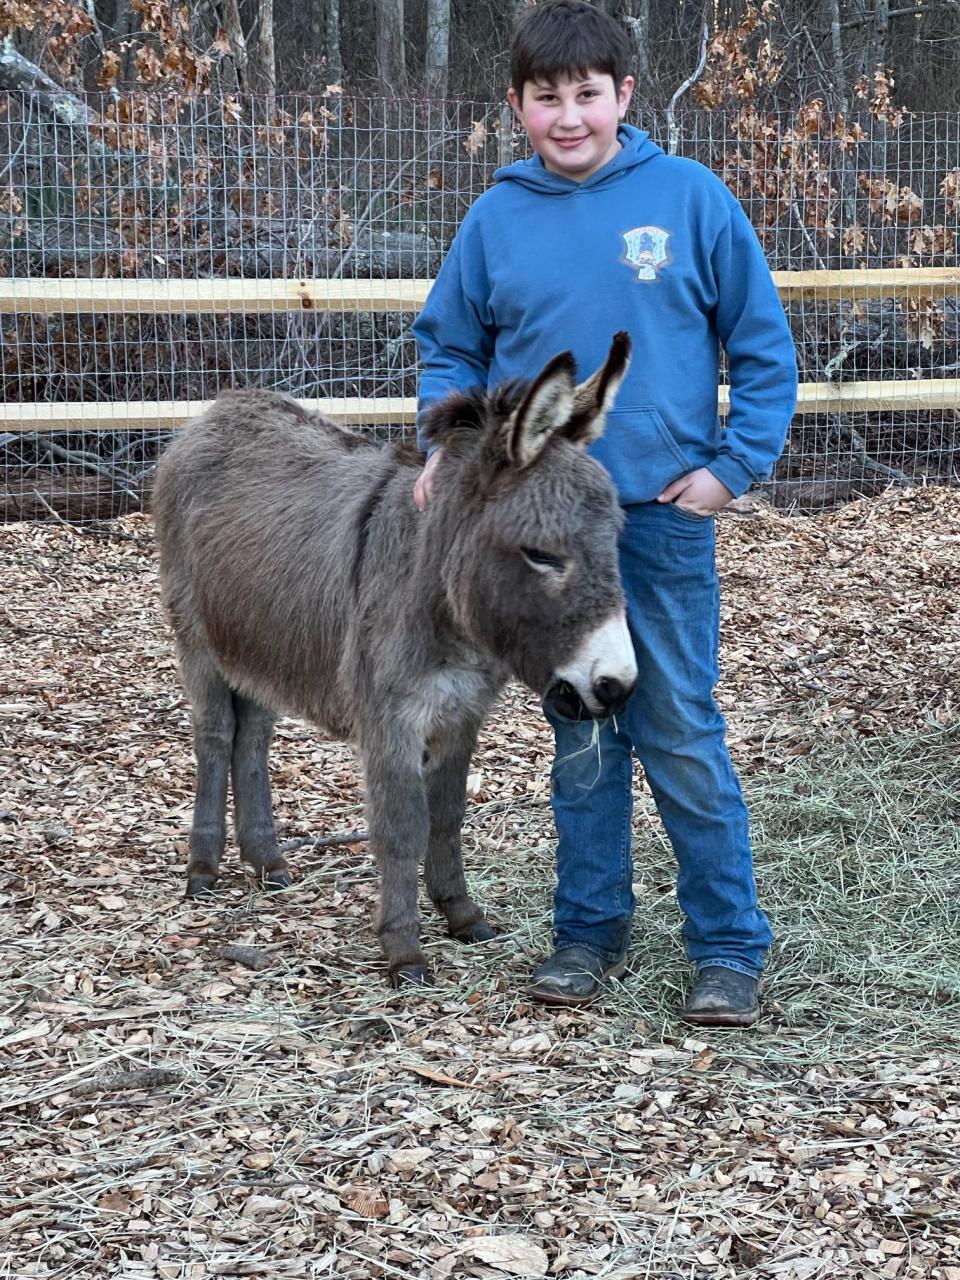 Anthony Ghazal pats his pet donkey, Lulu, at Deep Pond Farm in Taunton in an undated photo.